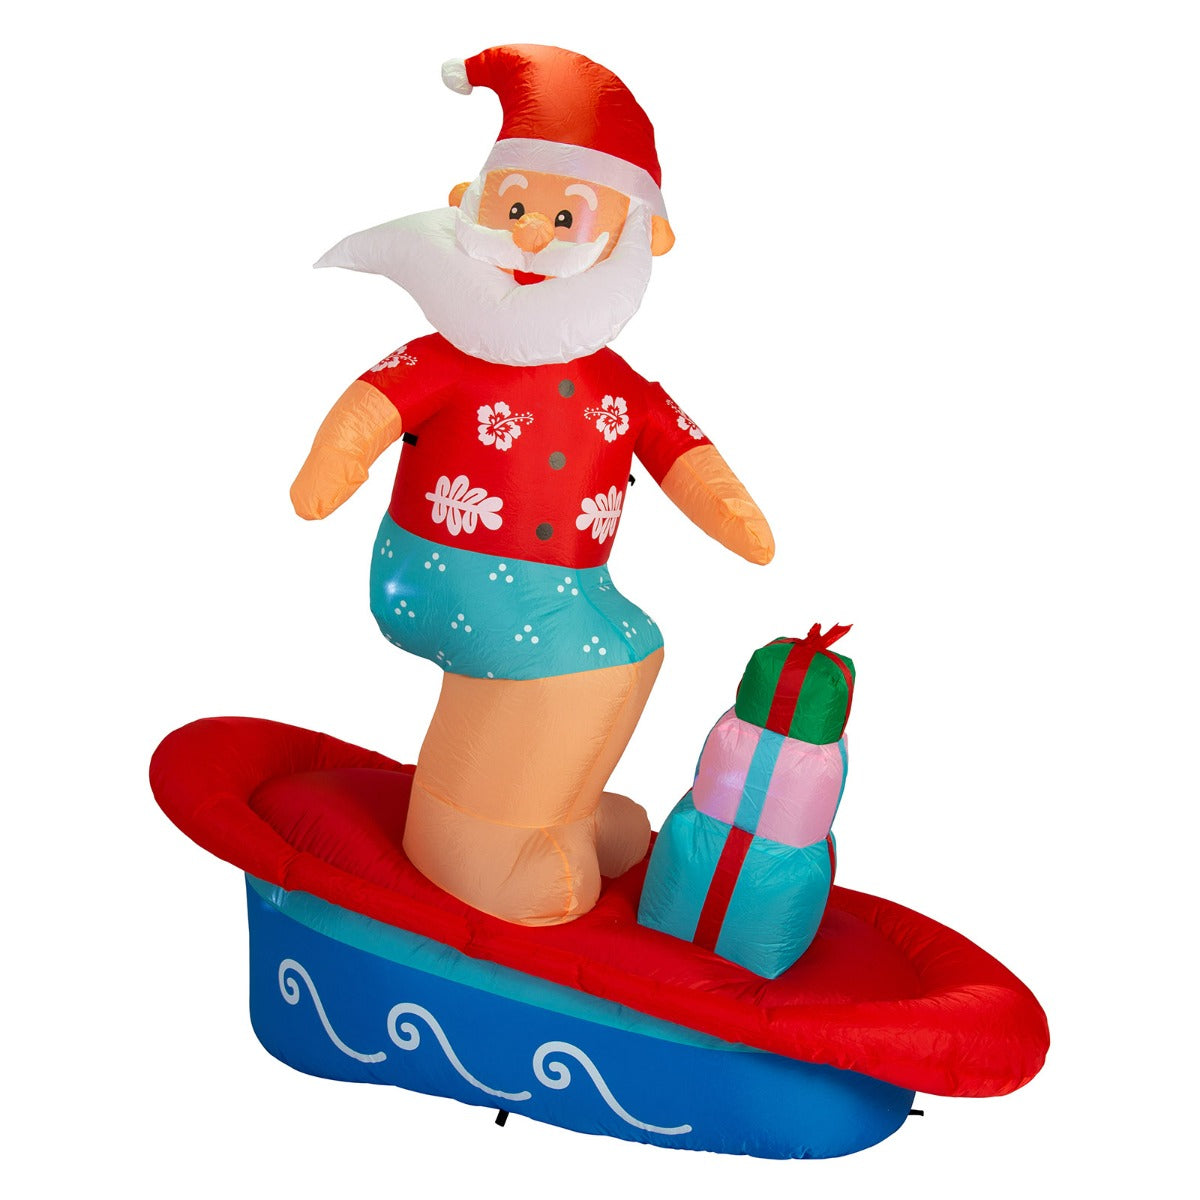 Stockholm Christmas Lights Xmas Inflatable Airpower Surfing Santa On Wave 2.1m